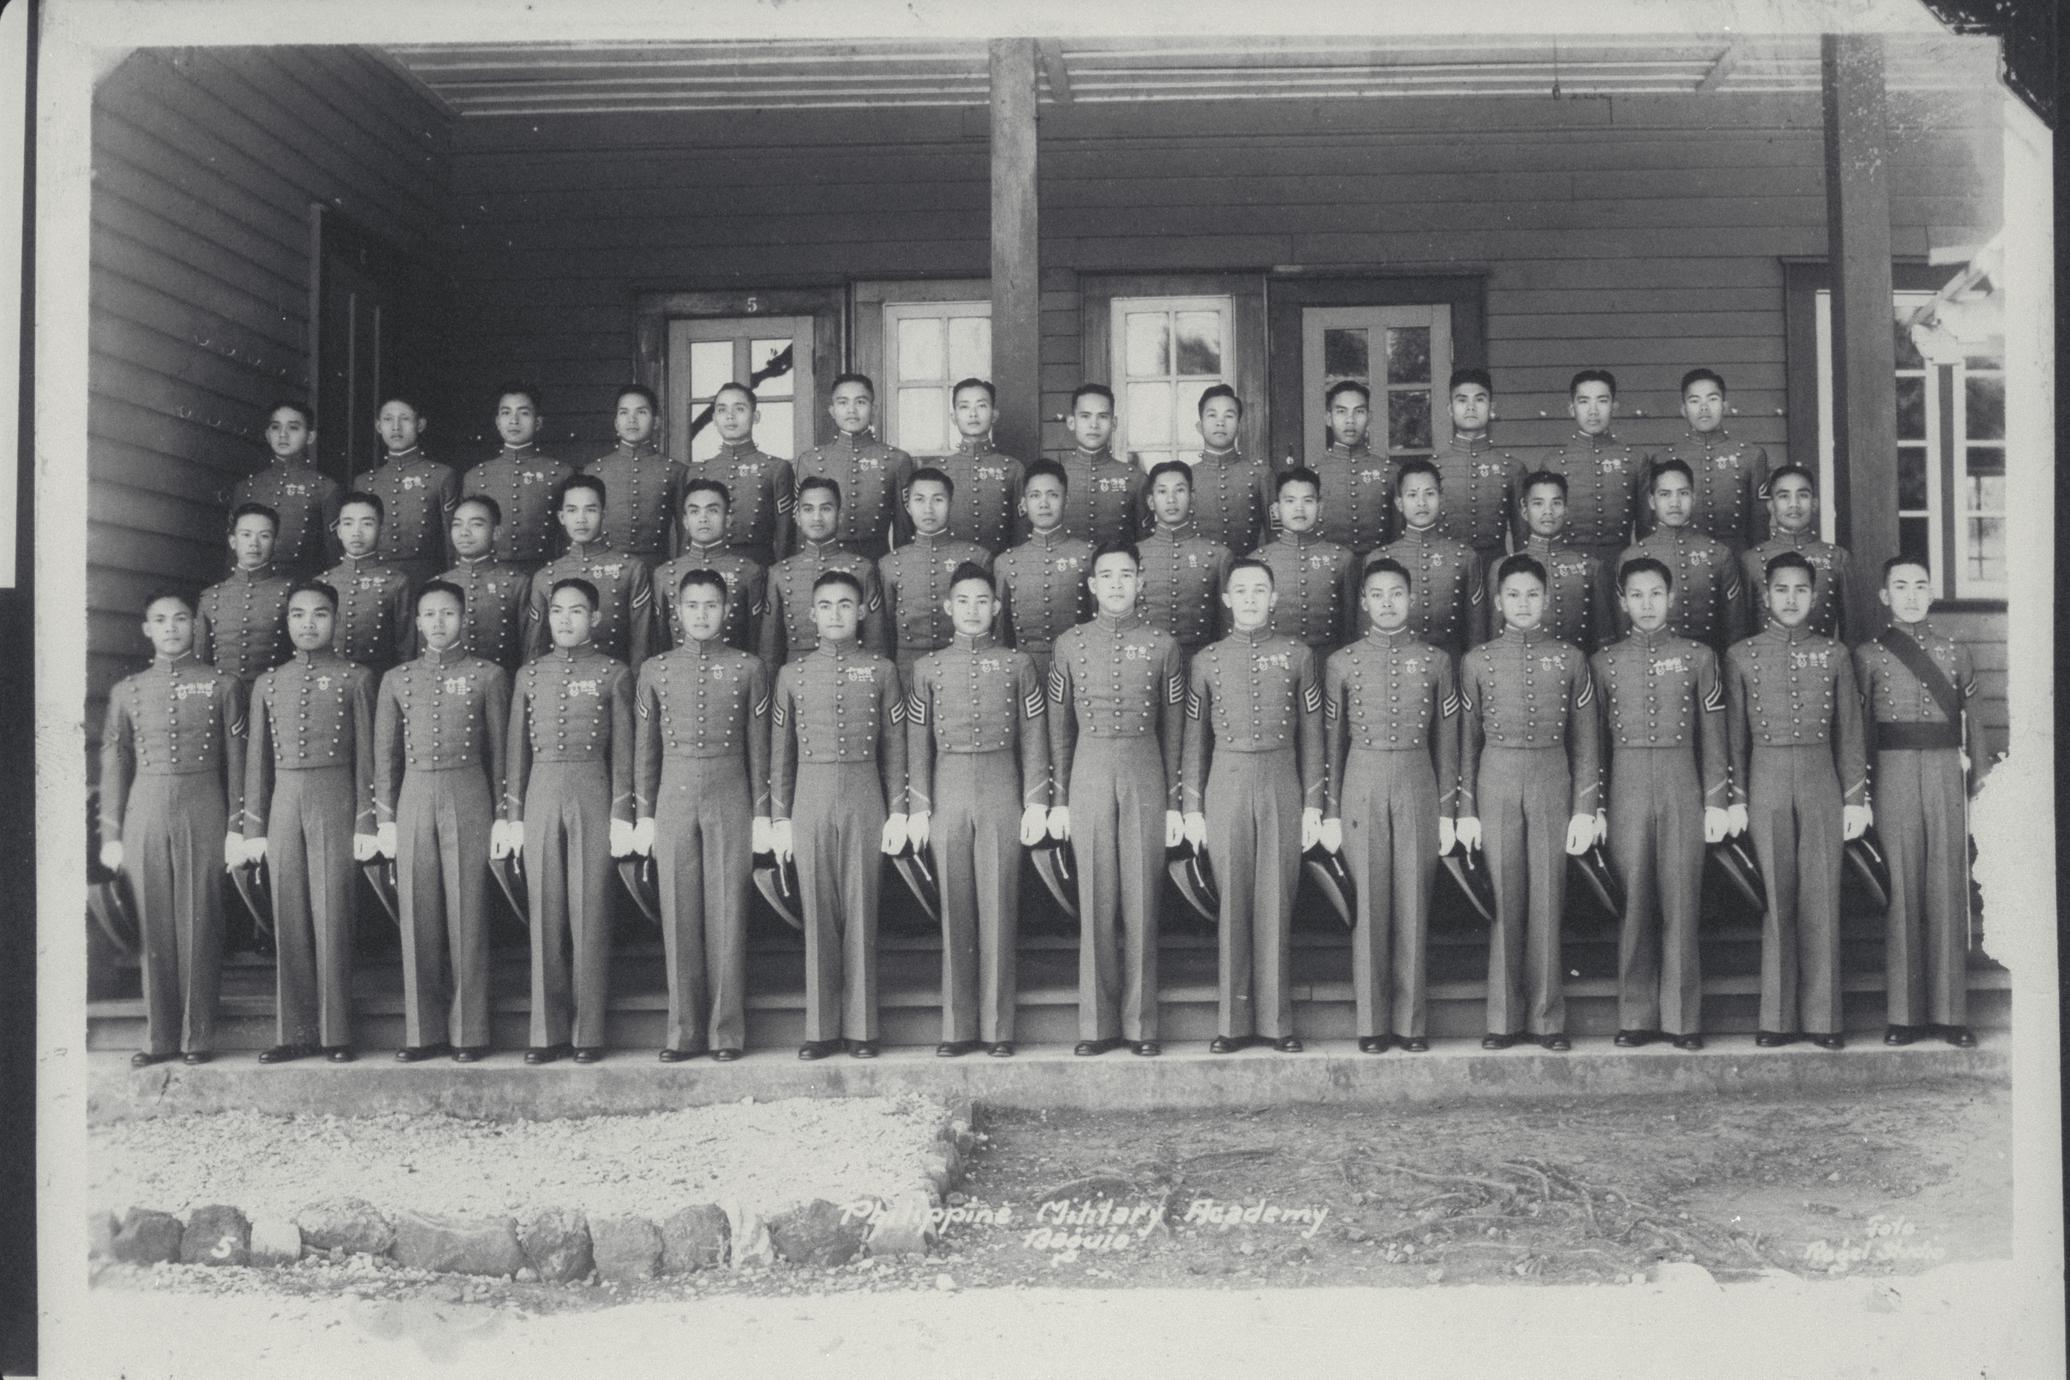 Cadets standing in uniform, Philippine Military Academy, Baguio